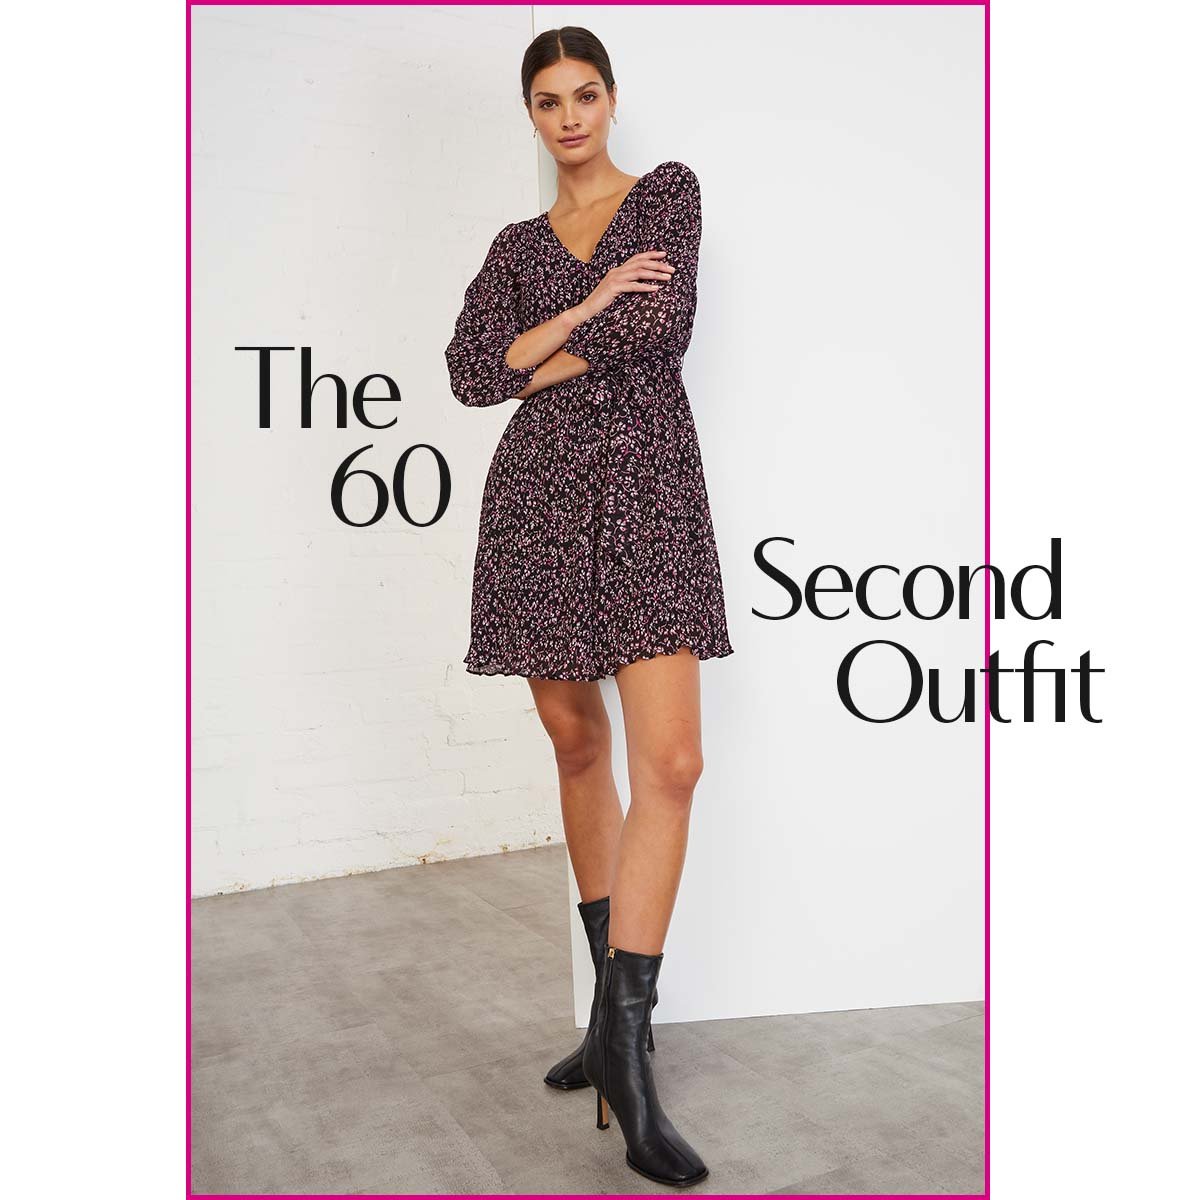 The 60 Second Outfit